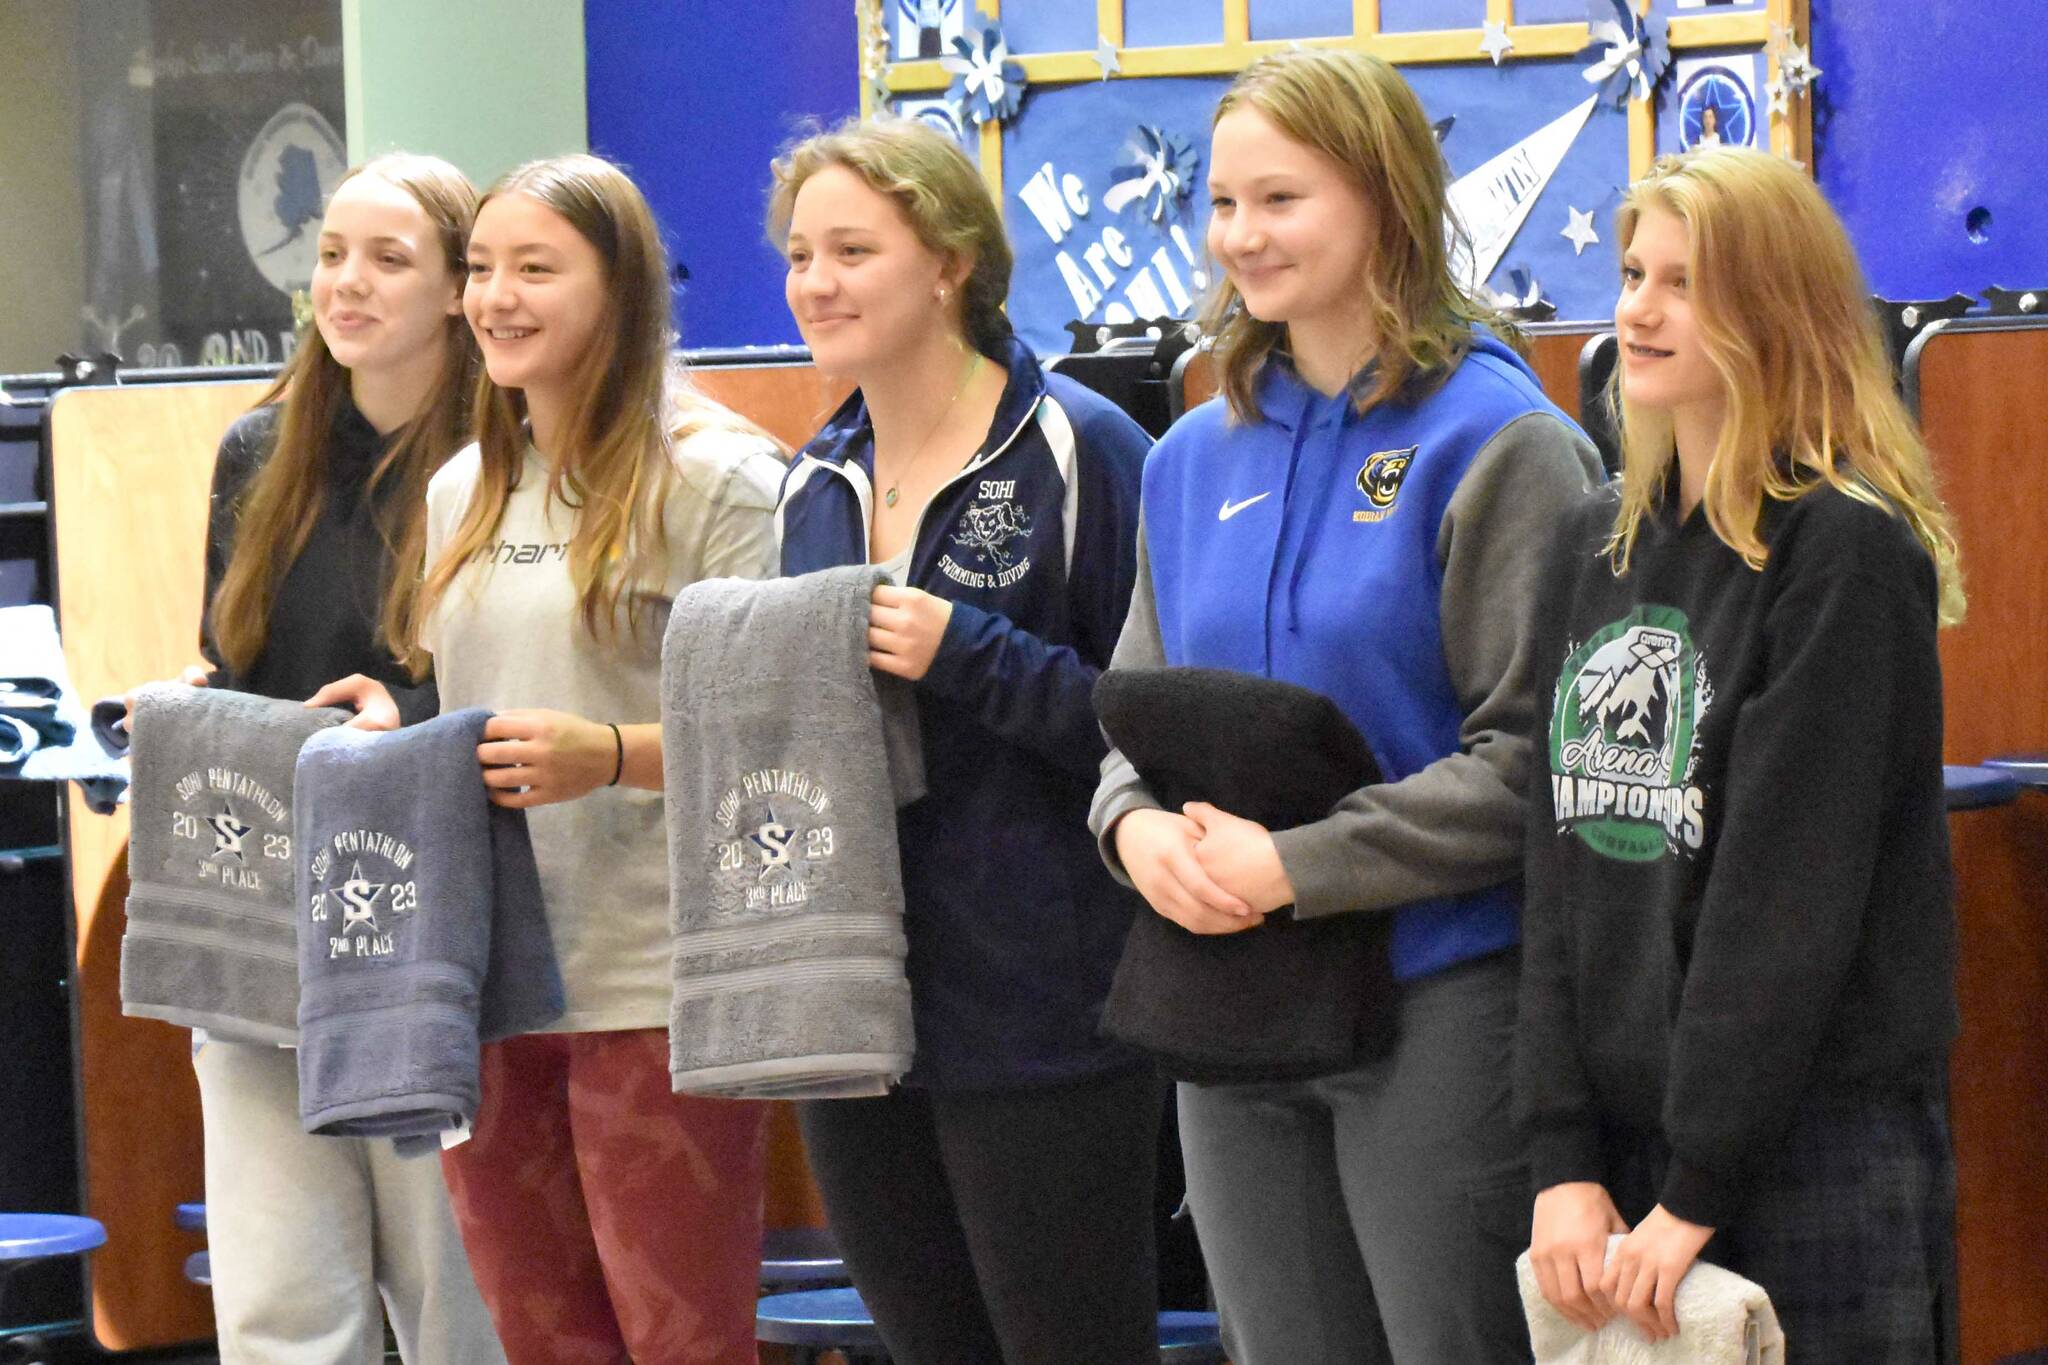 The top five finishers in the SoHi Pentathlon pose with their trophy towels Friday, Sept. 15, 2023, at Soldotna High School in Soldotna, Alaska. From left to right are first-place finisher Amaya Rocheleau of Kodiak, Colony's Jasmine Anderson in second, Soldotna's Charisma Watkins in third, Kodiak's Morgan Hagen in fifth and Colony's Hannah Cooper in fourth. (Photo by Jeff Helminiak/Peninsula Clarion)